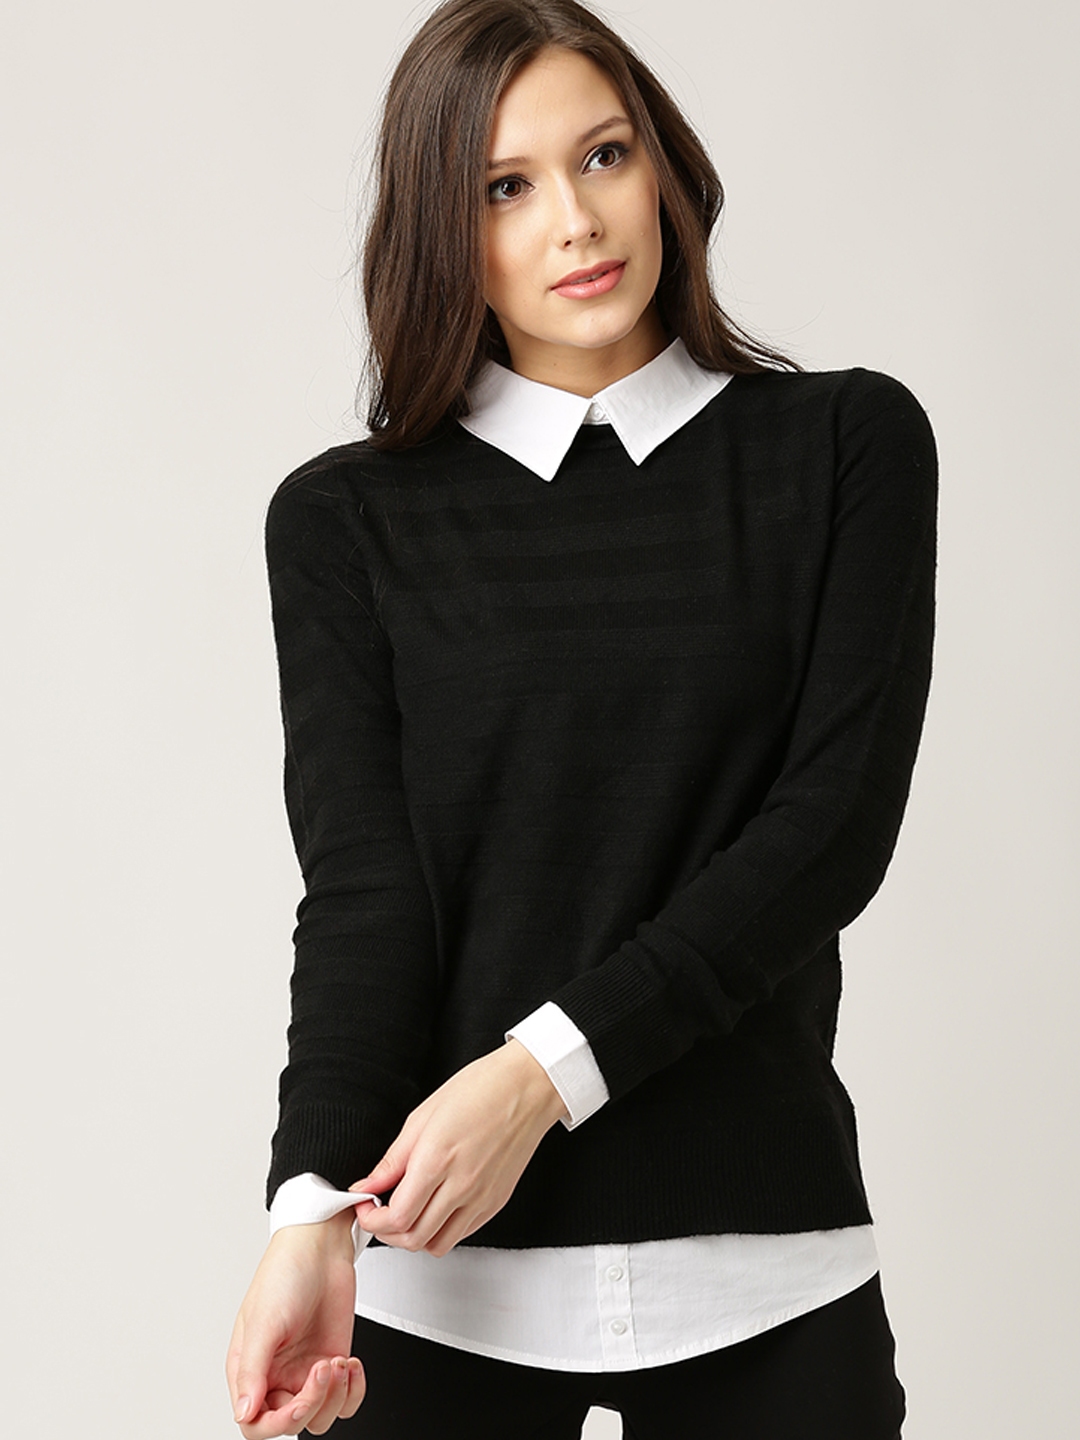 Collared Shirt Under Sweater Women Cheapest Offers Save Jlcatj